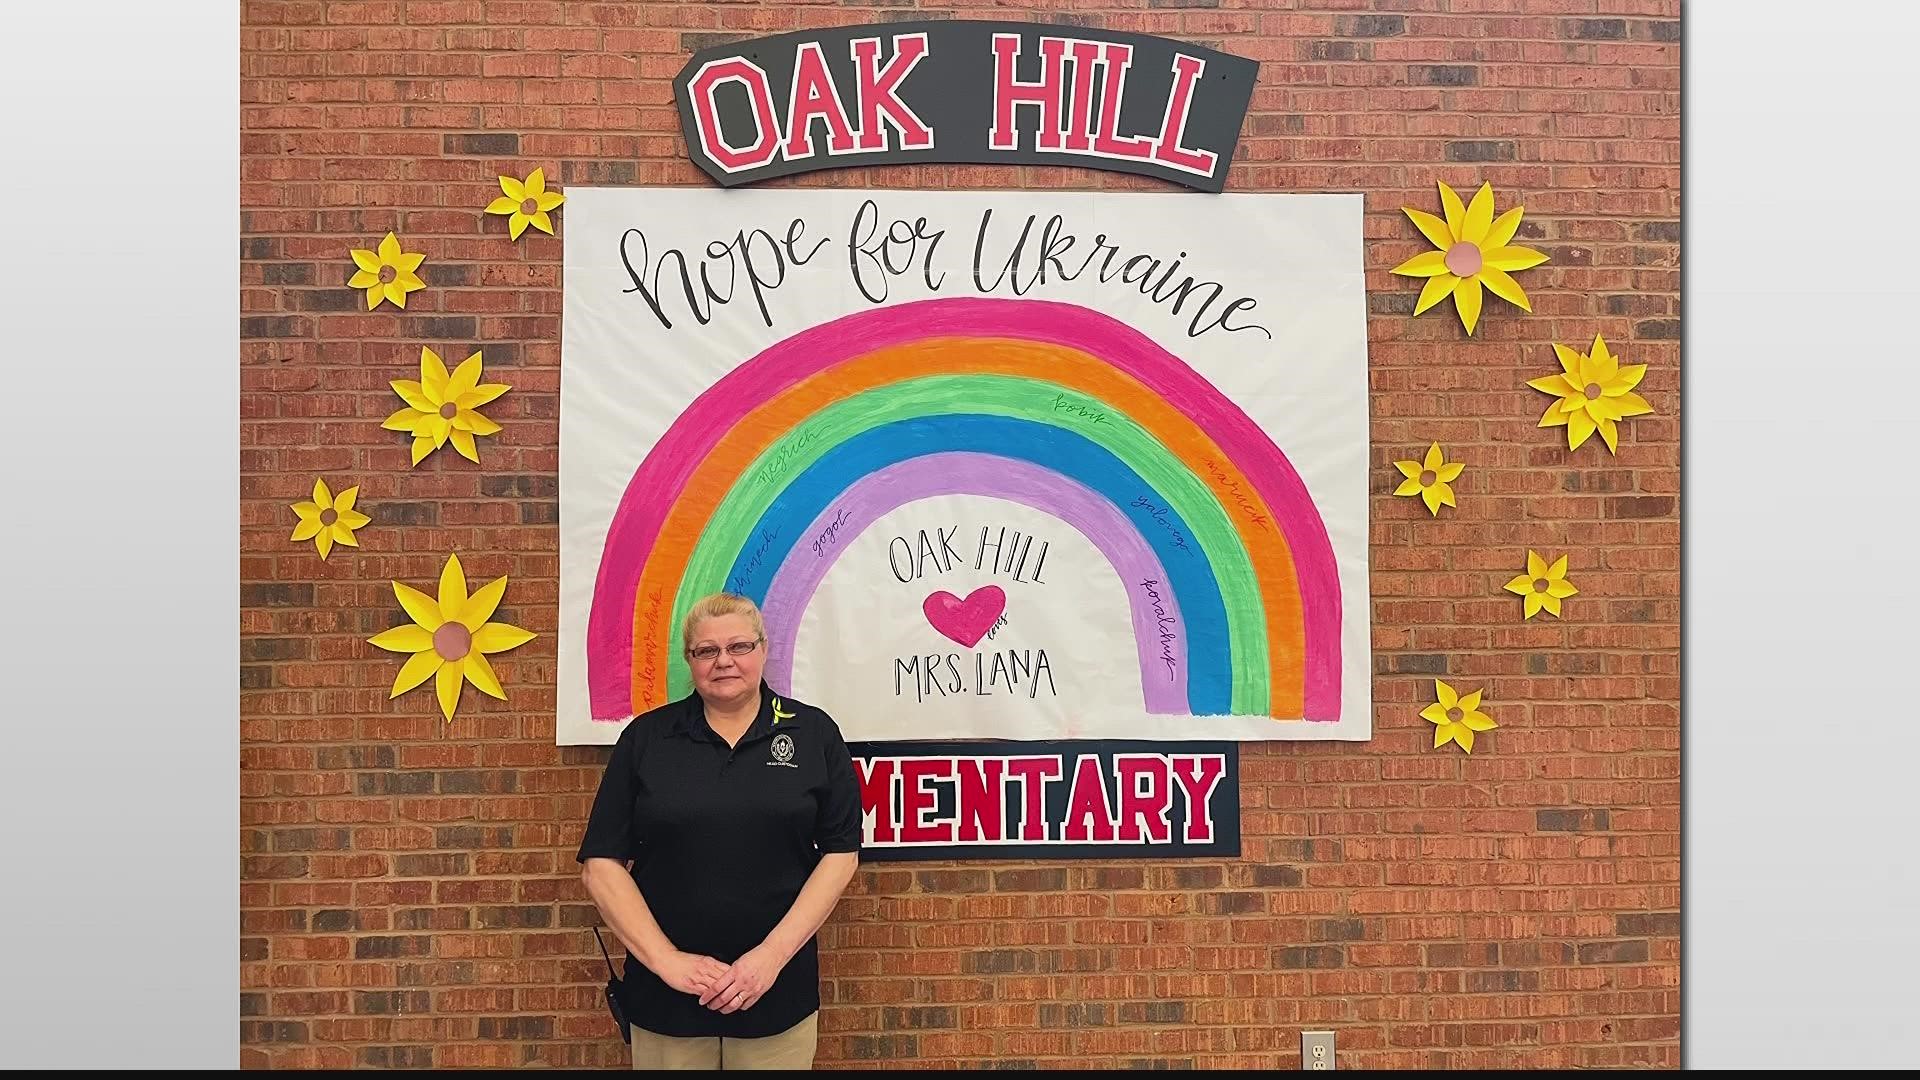 Oak Hill Elementary is showing its support.